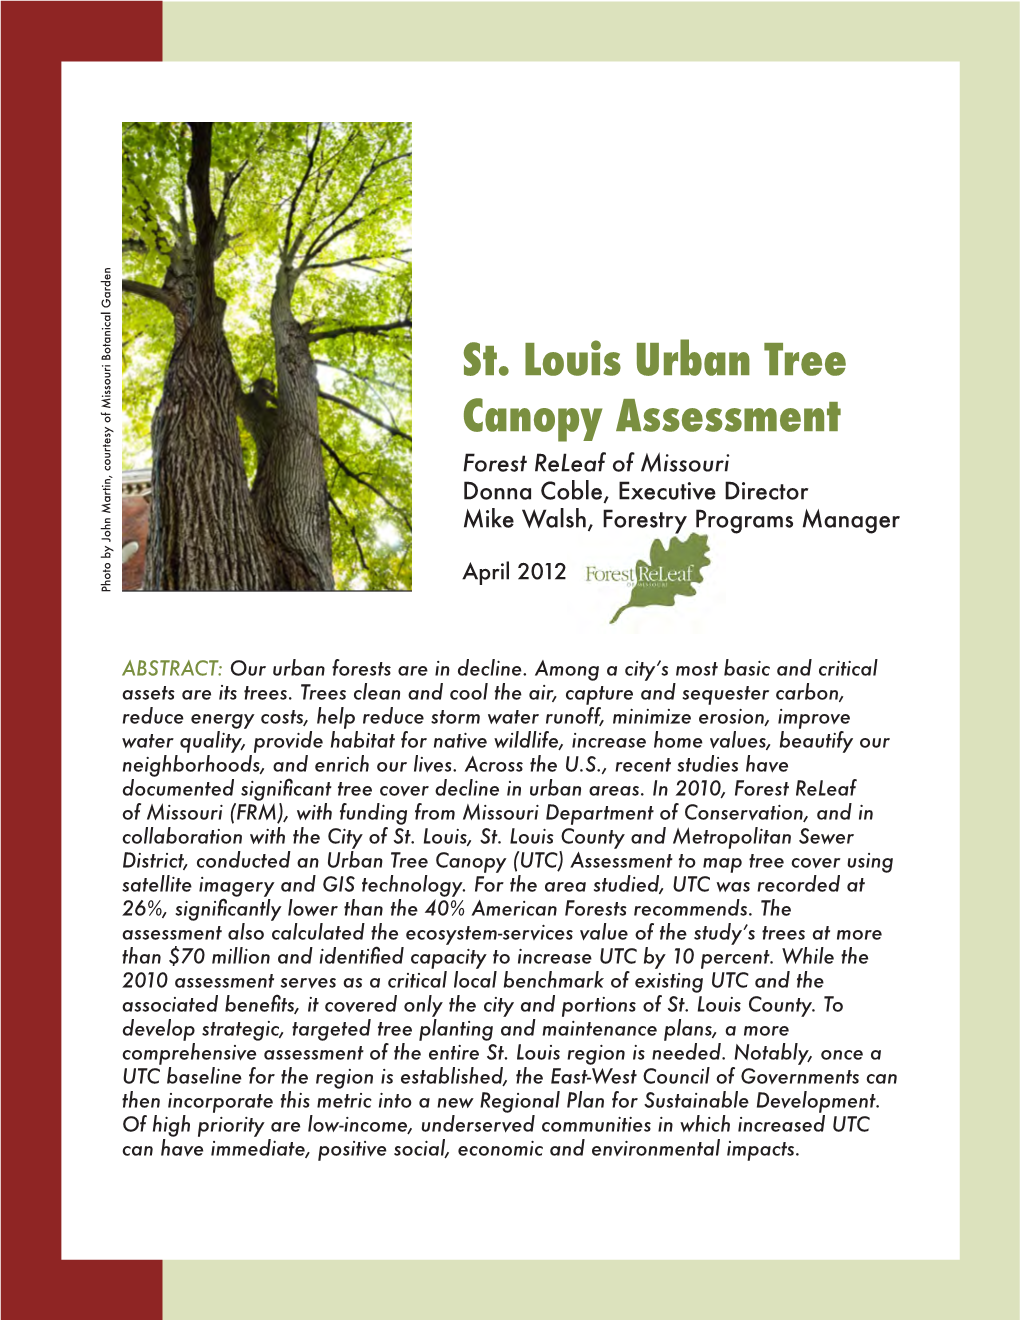 St. Louis Urban Tree Canopy Assessment Forest Releaf of Missouri Donna Coble, Executive Director Mike Walsh, Forestry Programs Manager